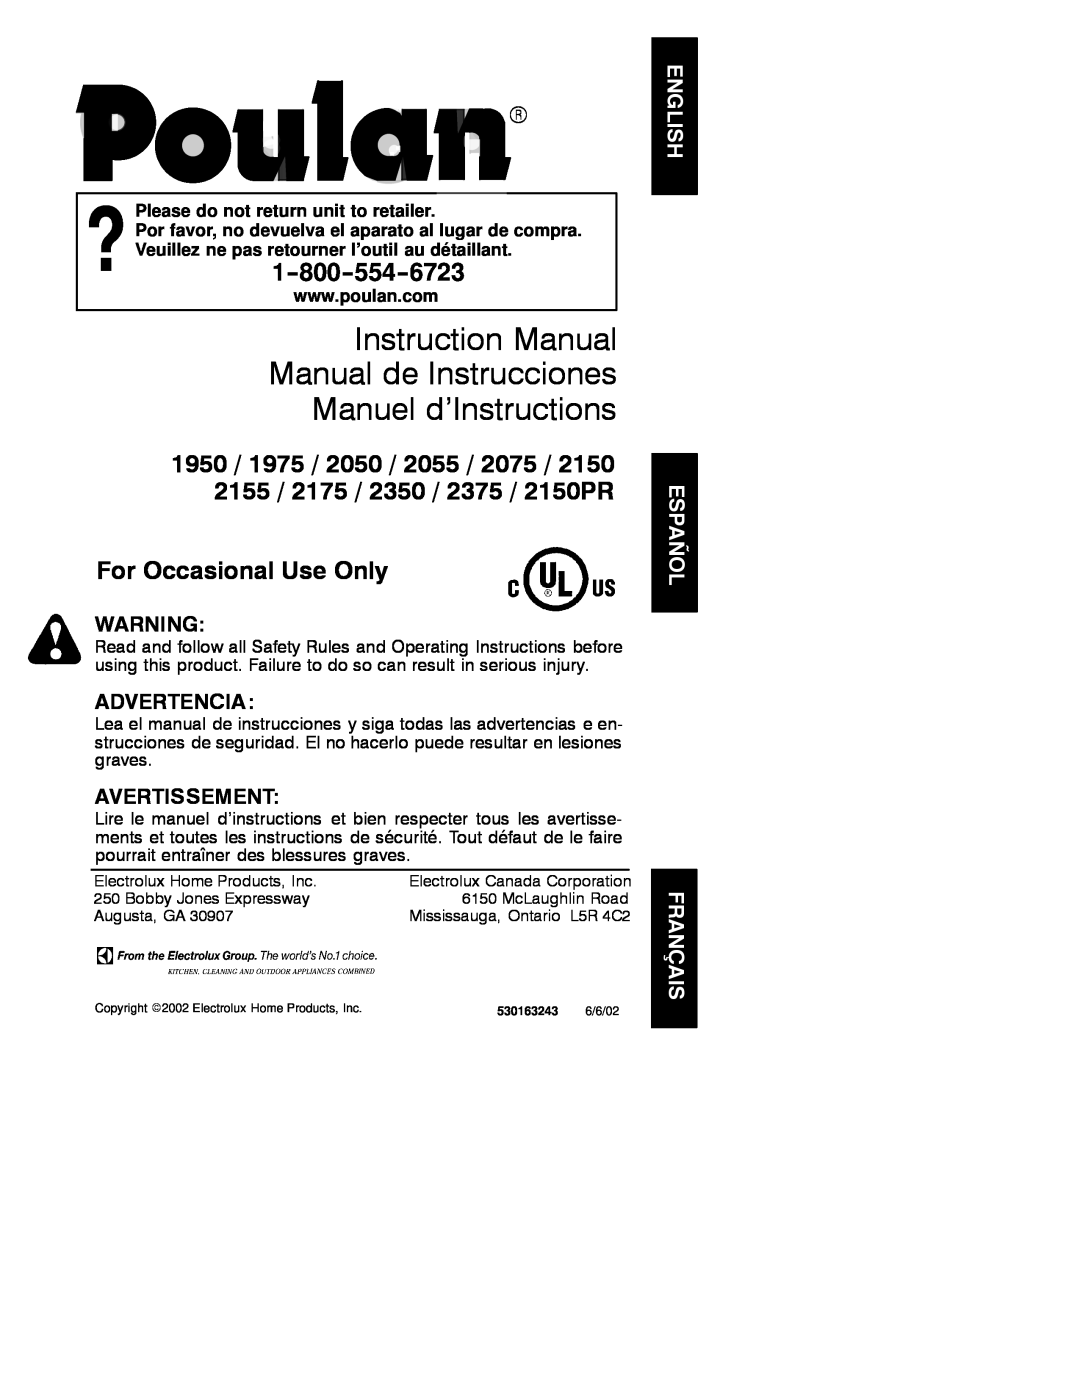 Poulan 530163243 instruction manual For Occasional Use Only, Advertencia, Avertissement 